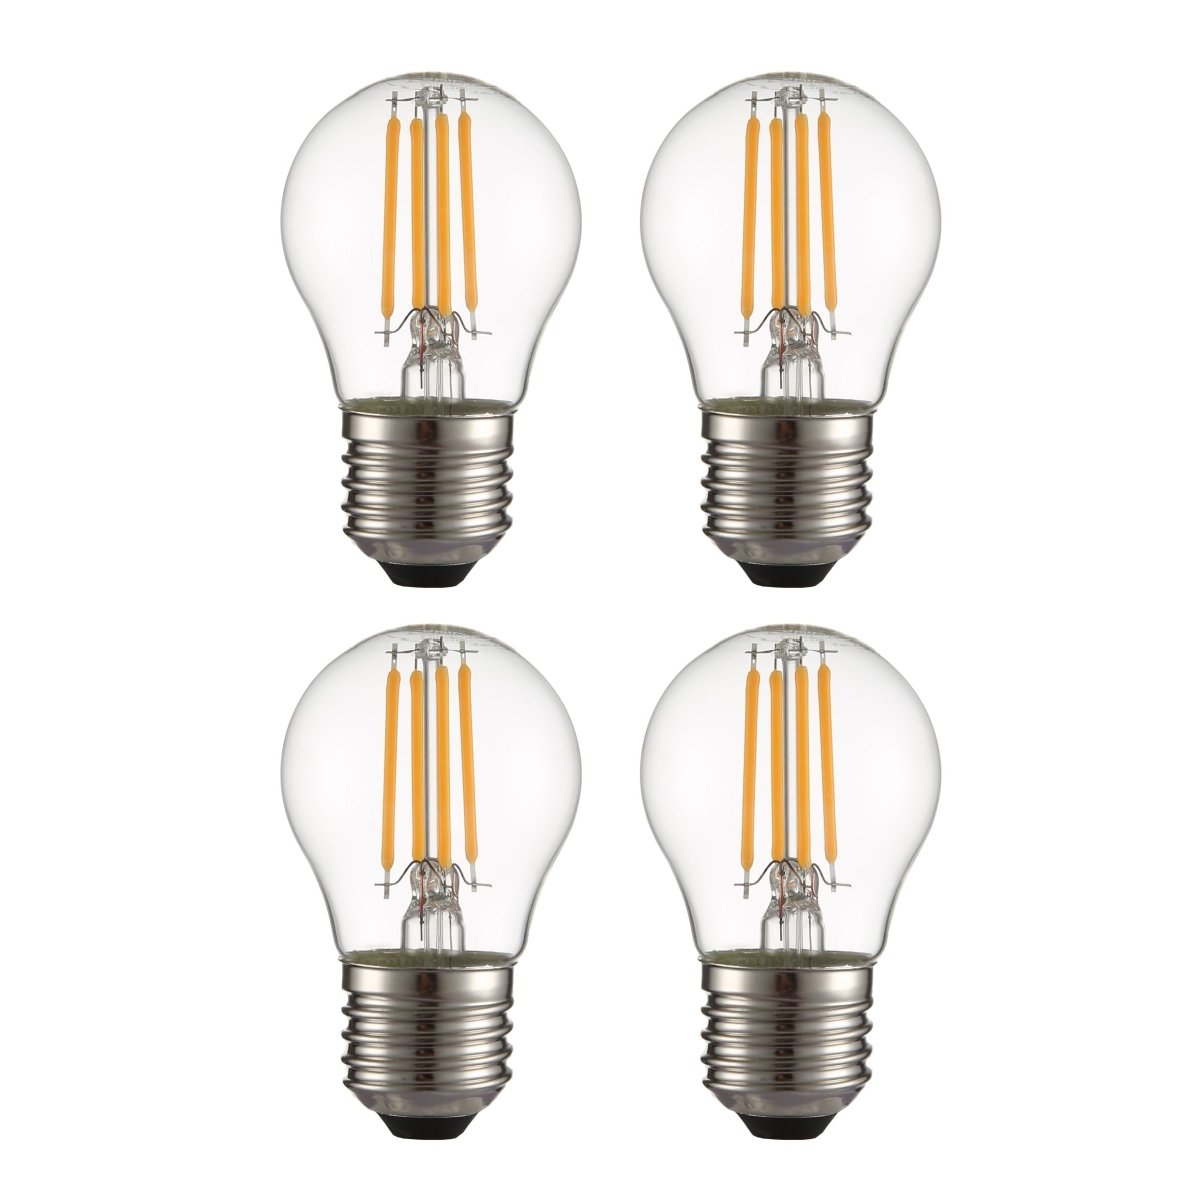 Main image of LED Dimmable Filament Bulb G45 Golf Ball E27 Edison Screw 4W 470lm Warm White 2700K Clear Pack of 4 | TEKLED 583-150244